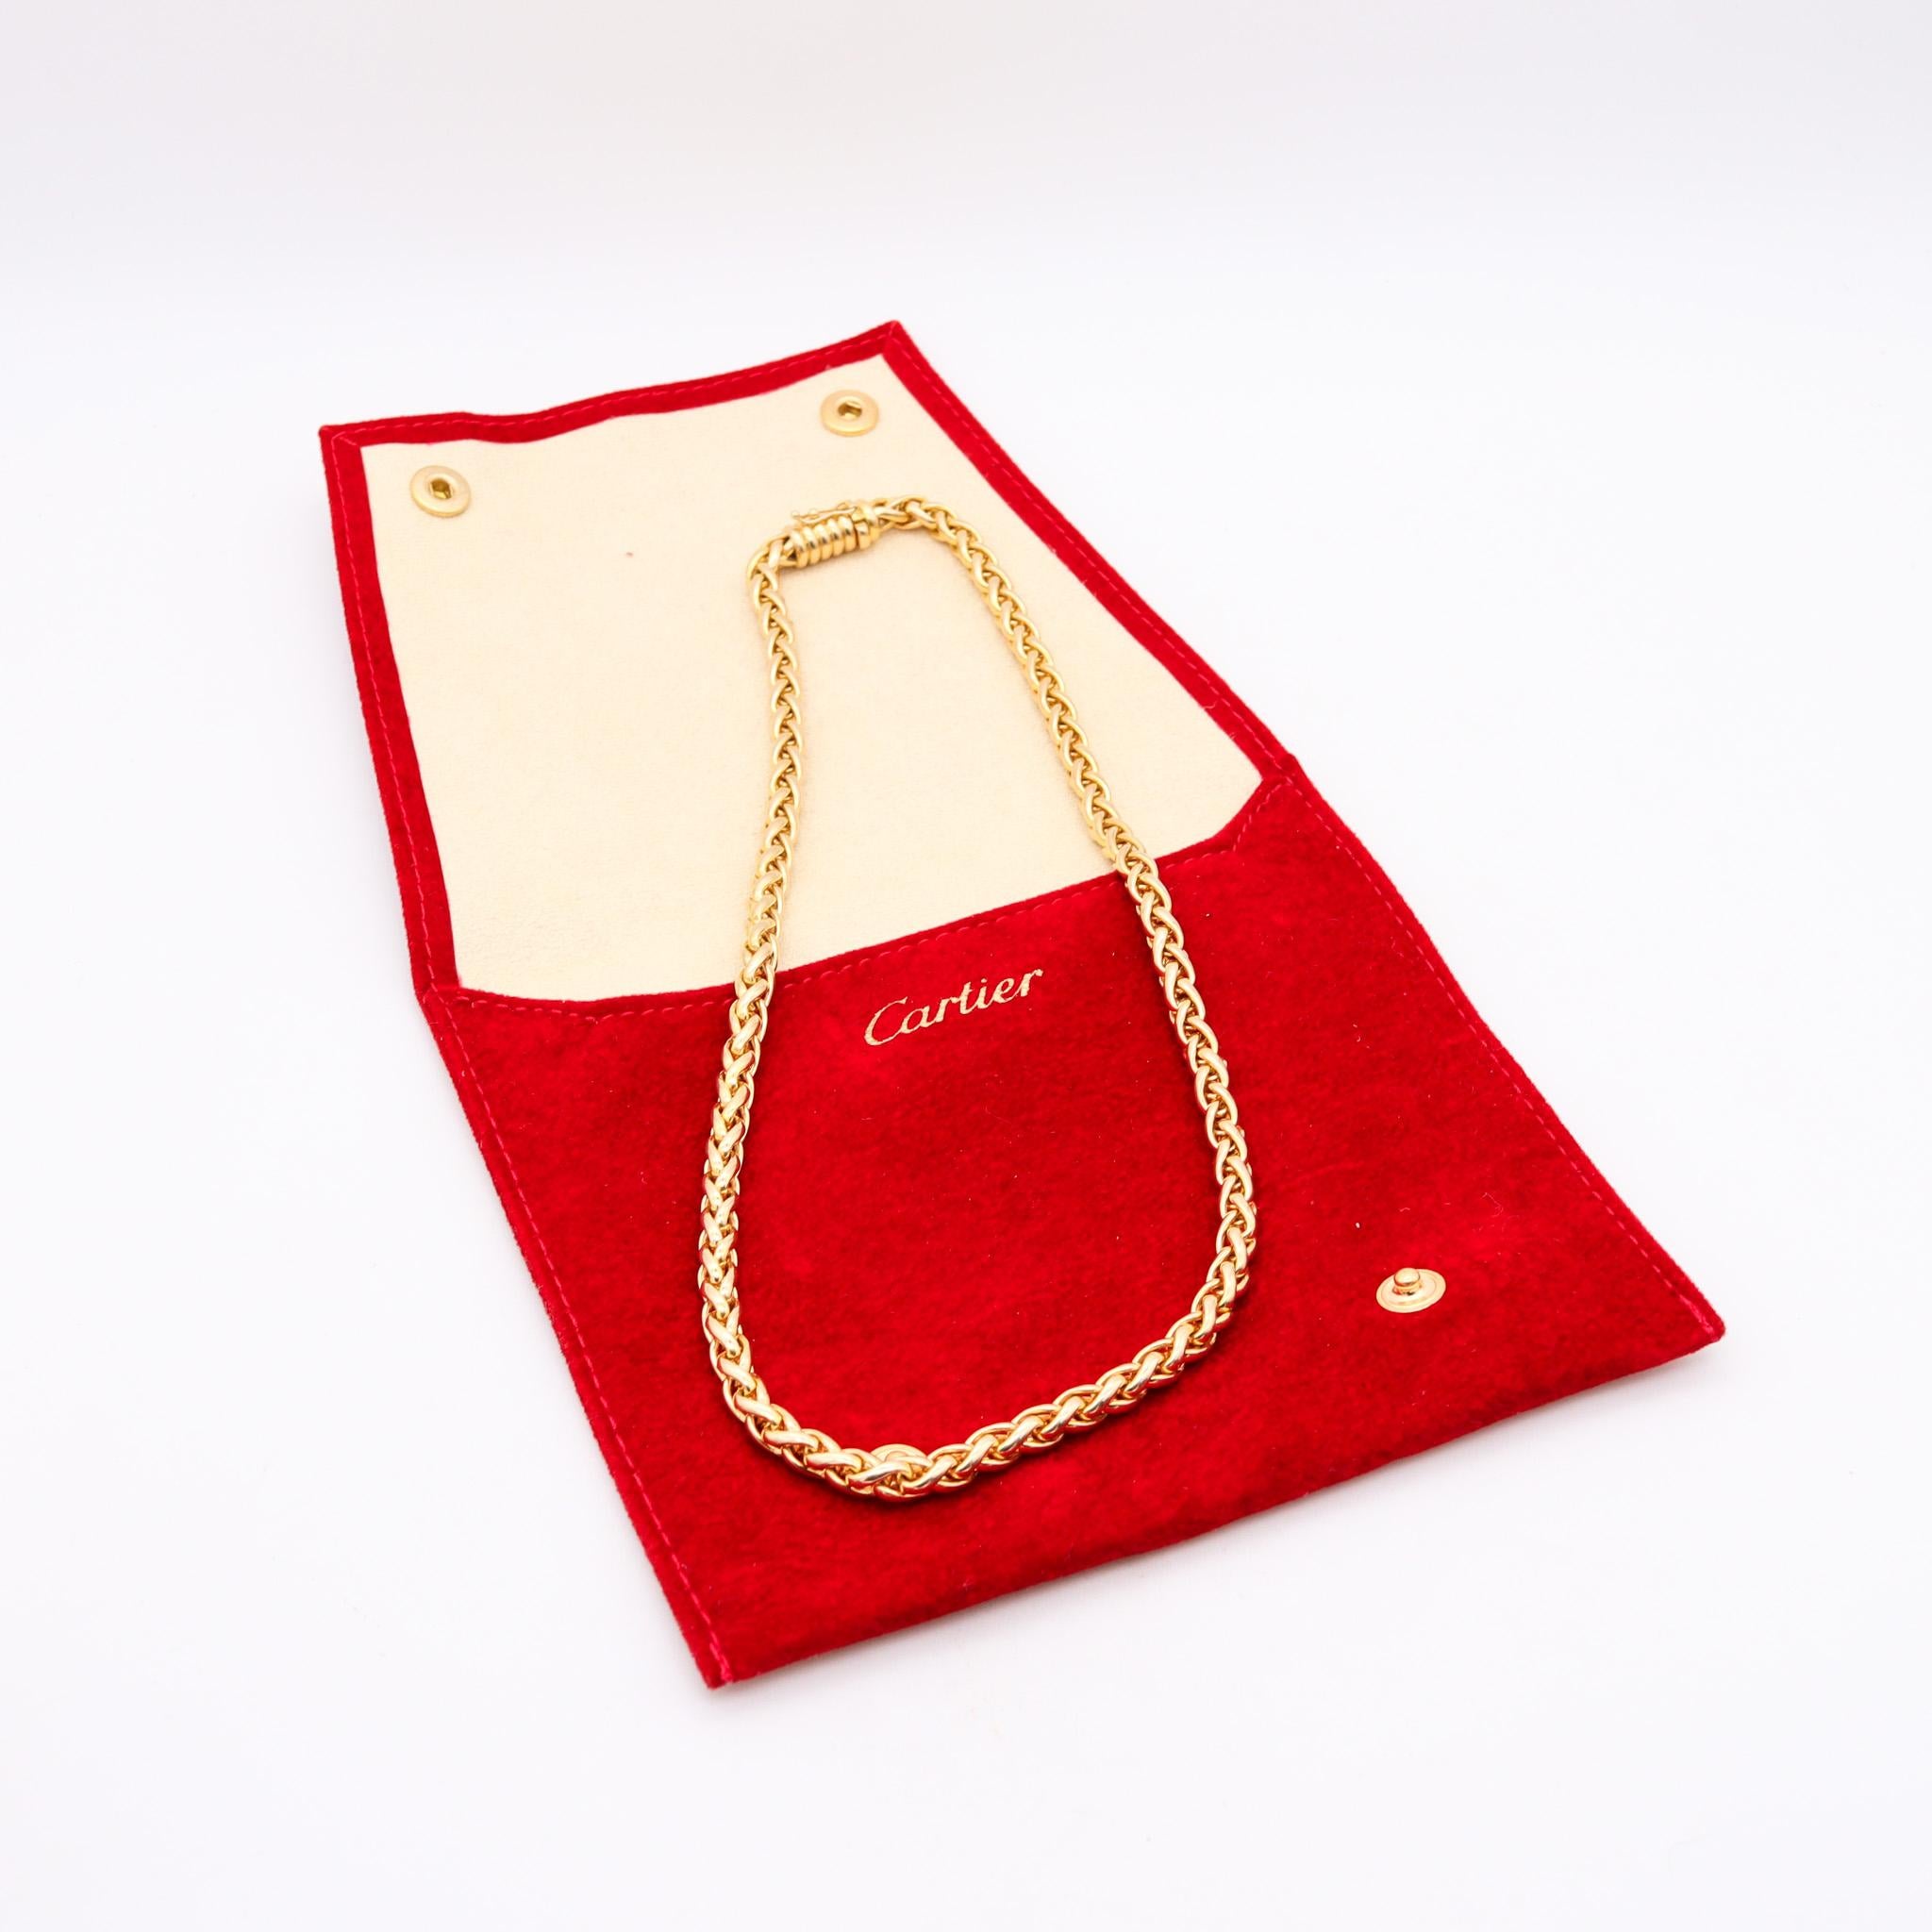 Cartier Paris Fabulous Necklace Chain In Solid 18Kt Yellow Gold With Red Pouch 3